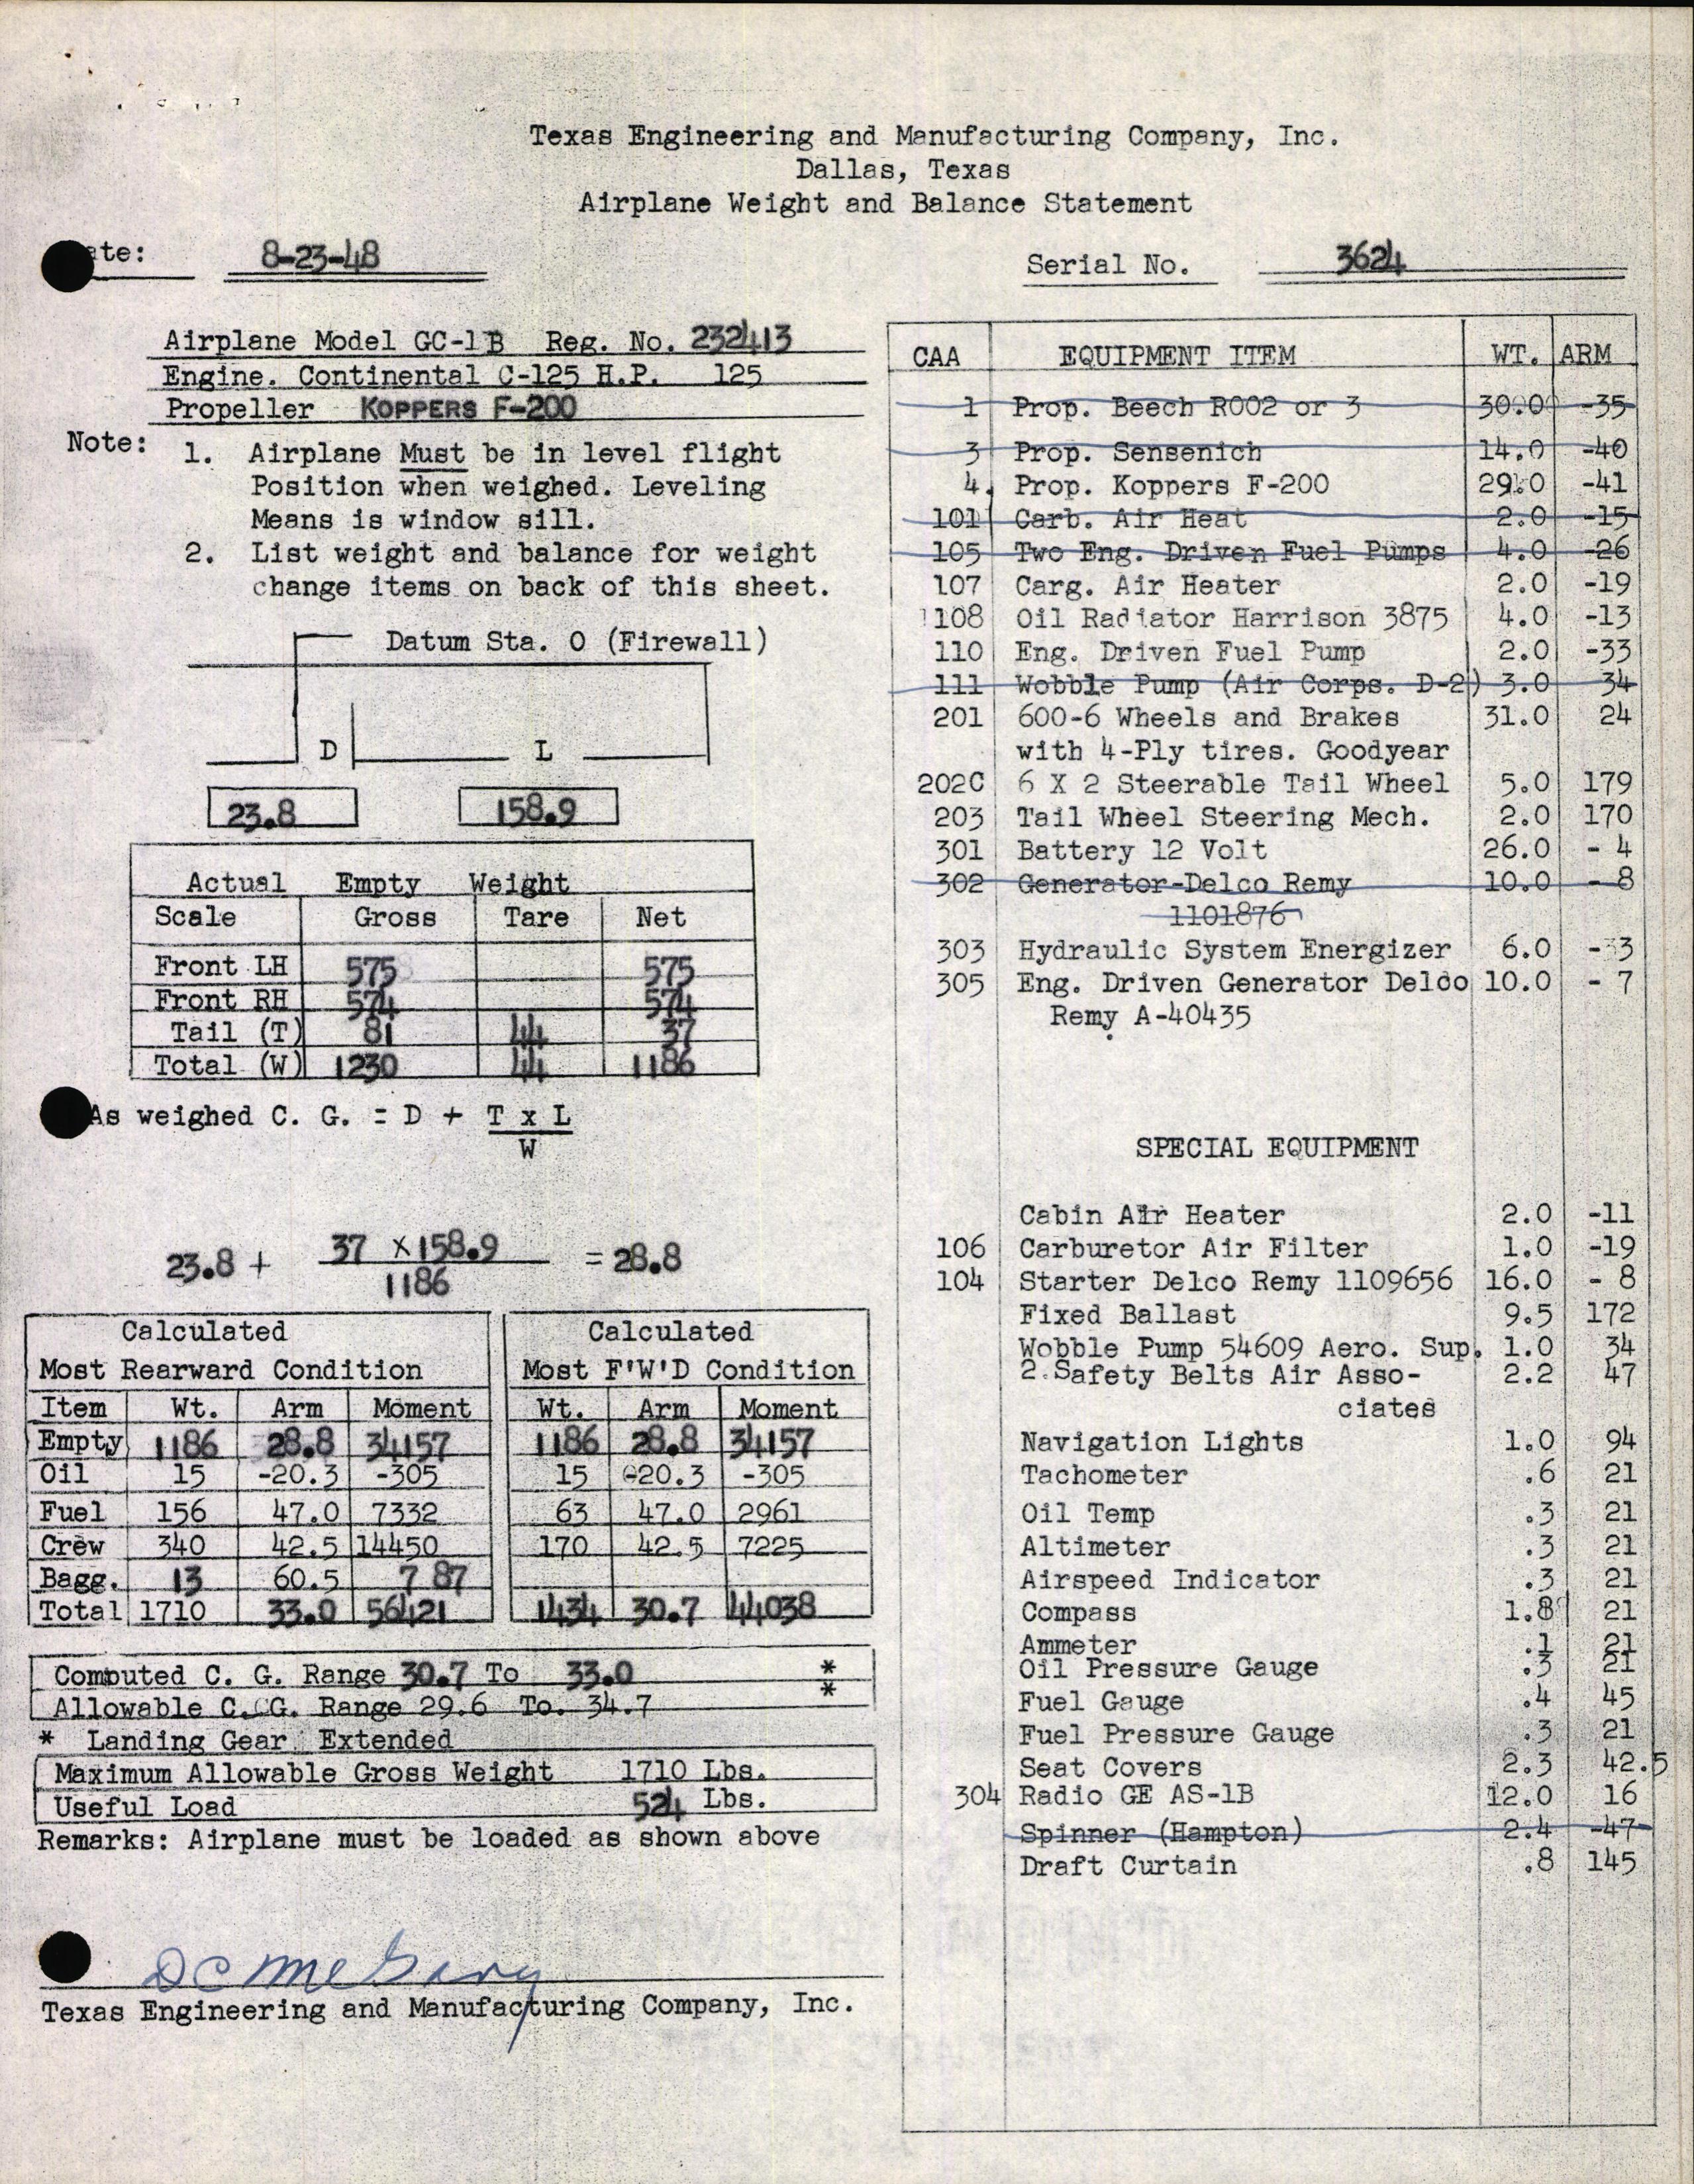 Sample page 4 from AirCorps Library document: Technical Information for Serial Number 3624